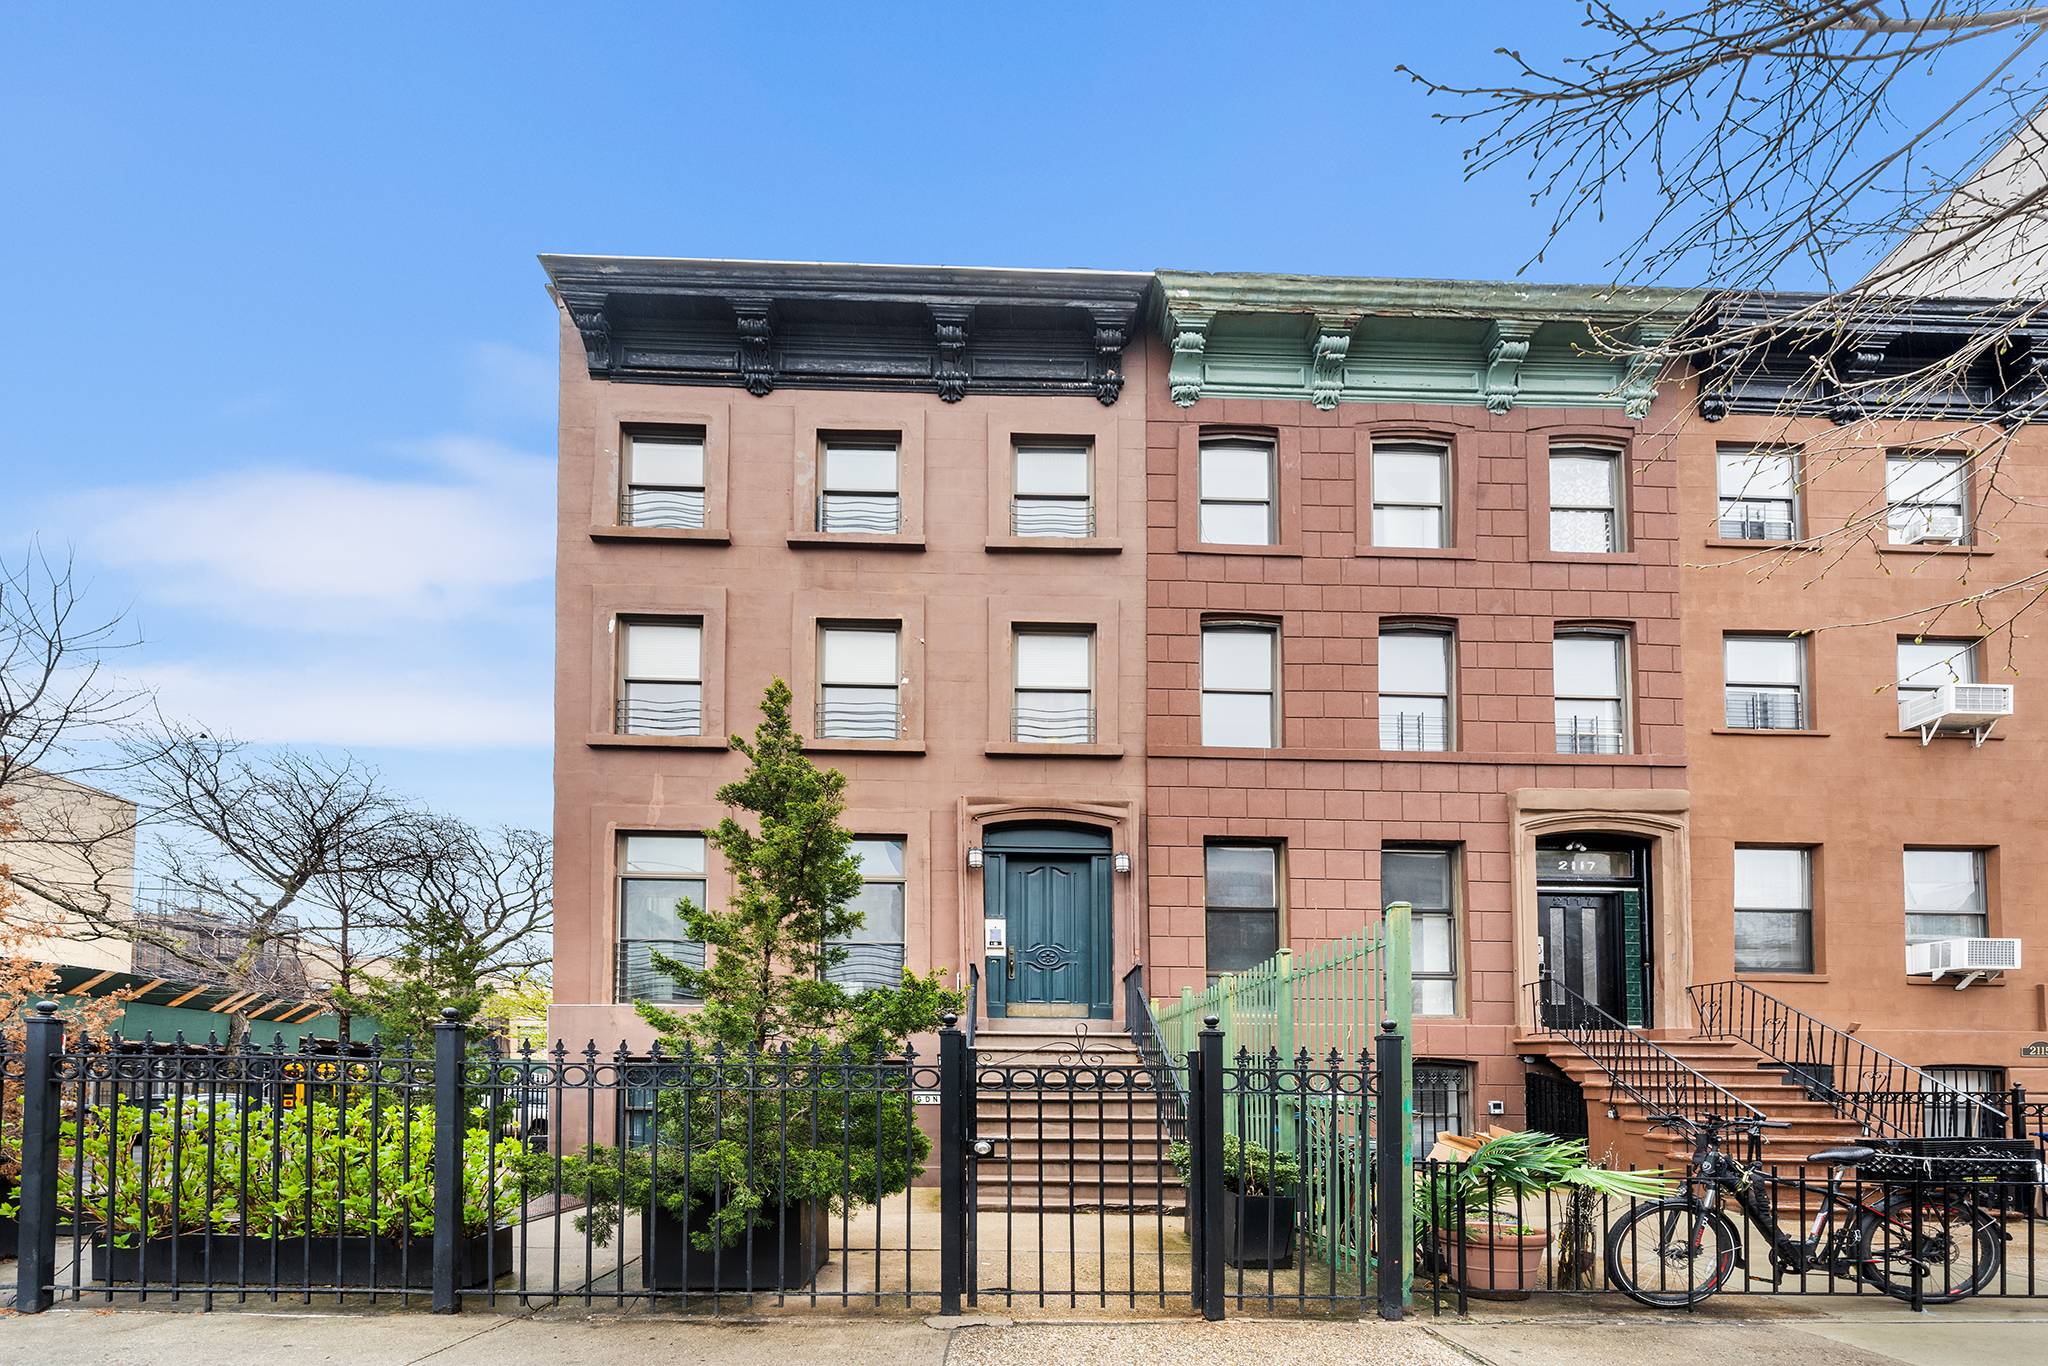 Discover urban elegance in this exquisite one bedroom gem nestled within a classic brownstone building in a prime location of New York City.